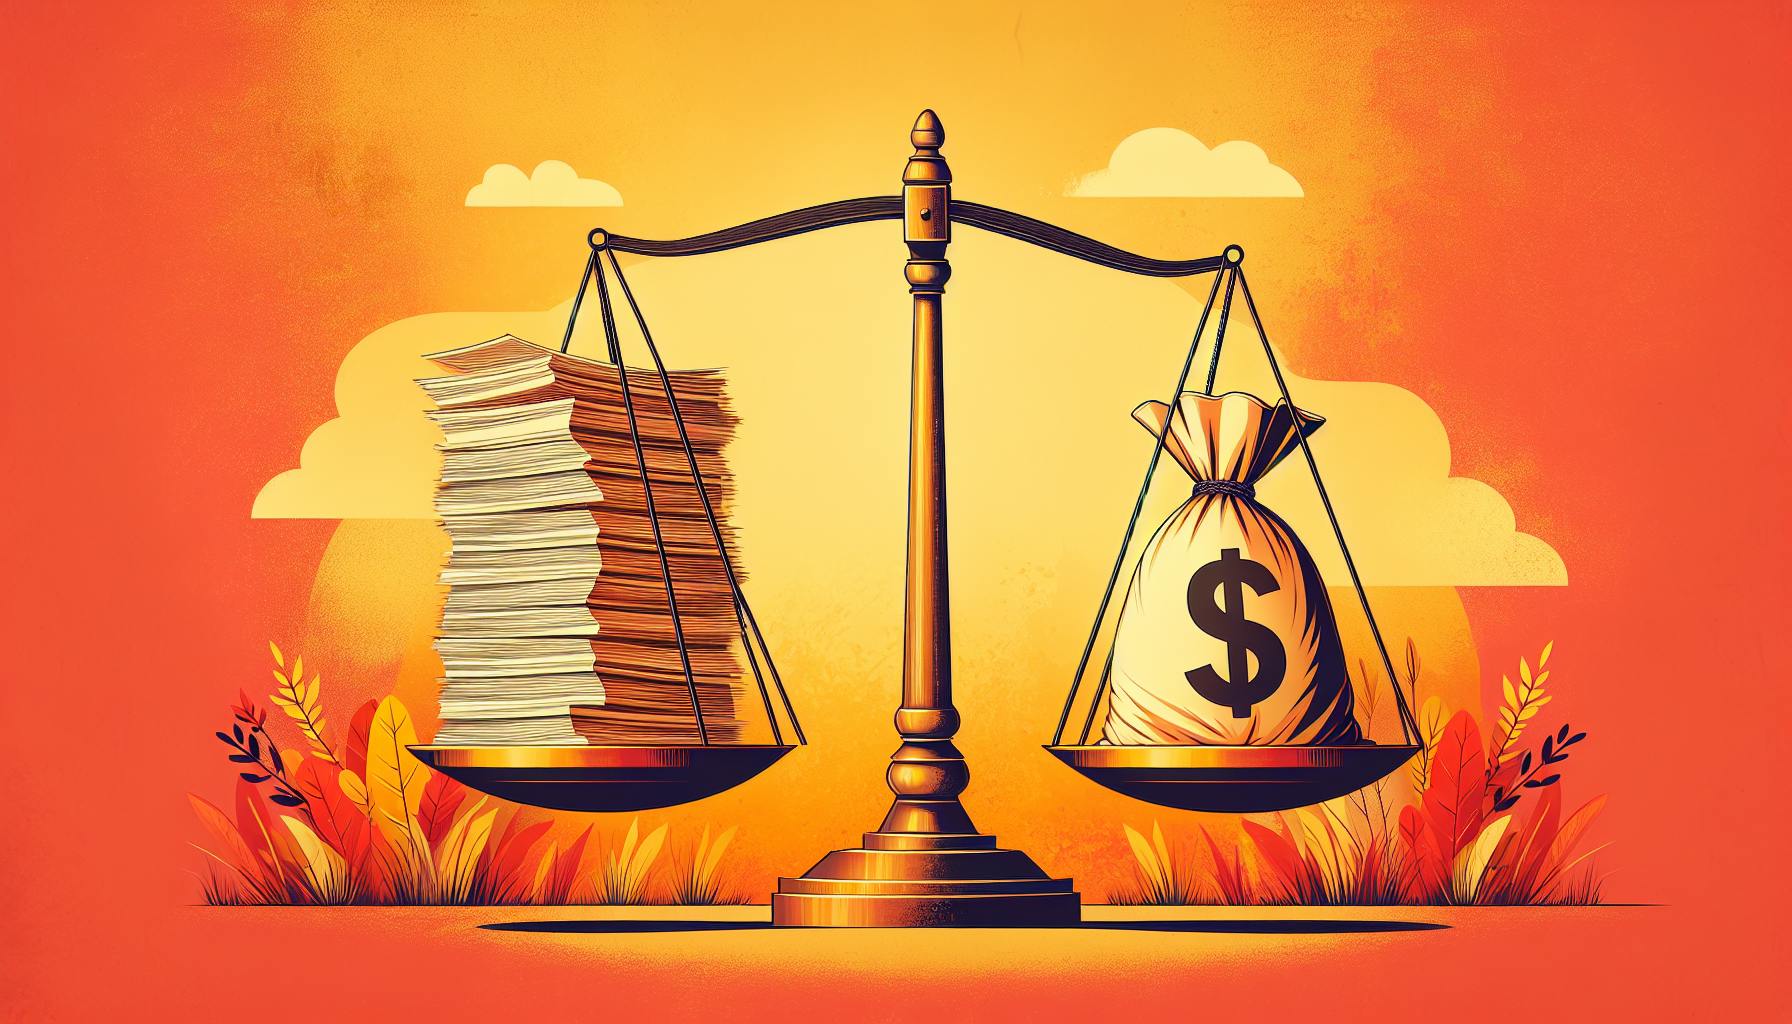 Legal Document Reviewer Salary in the US: Unpacking the Pay in Critical Case Analysis